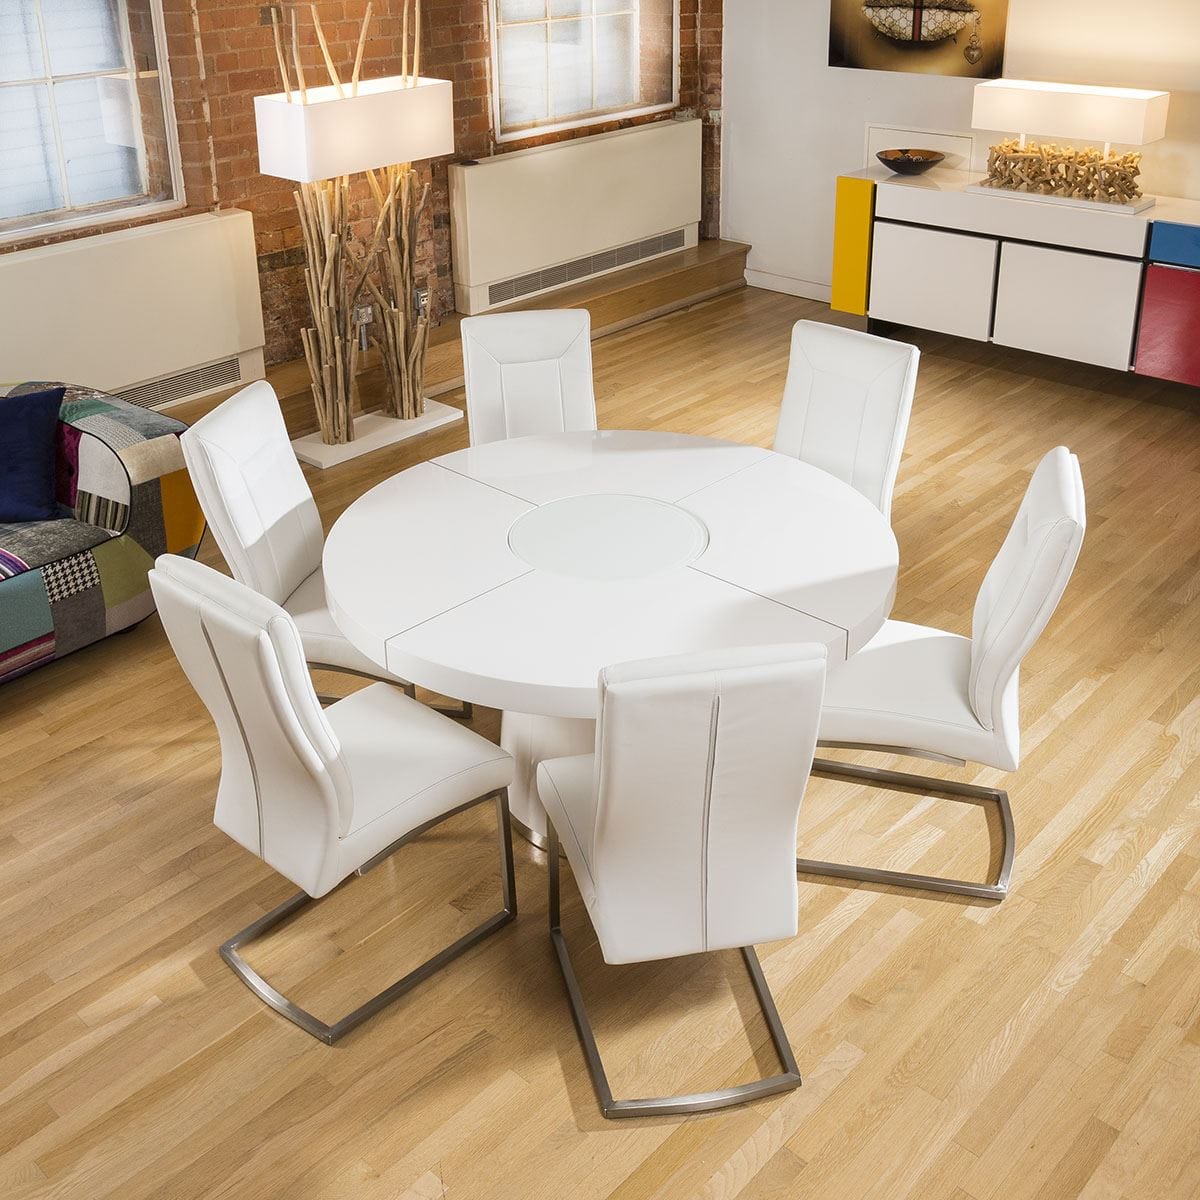 Quatropi Modern 1400mm Round White Gloss Dining Table & 6 White Padded Chairs